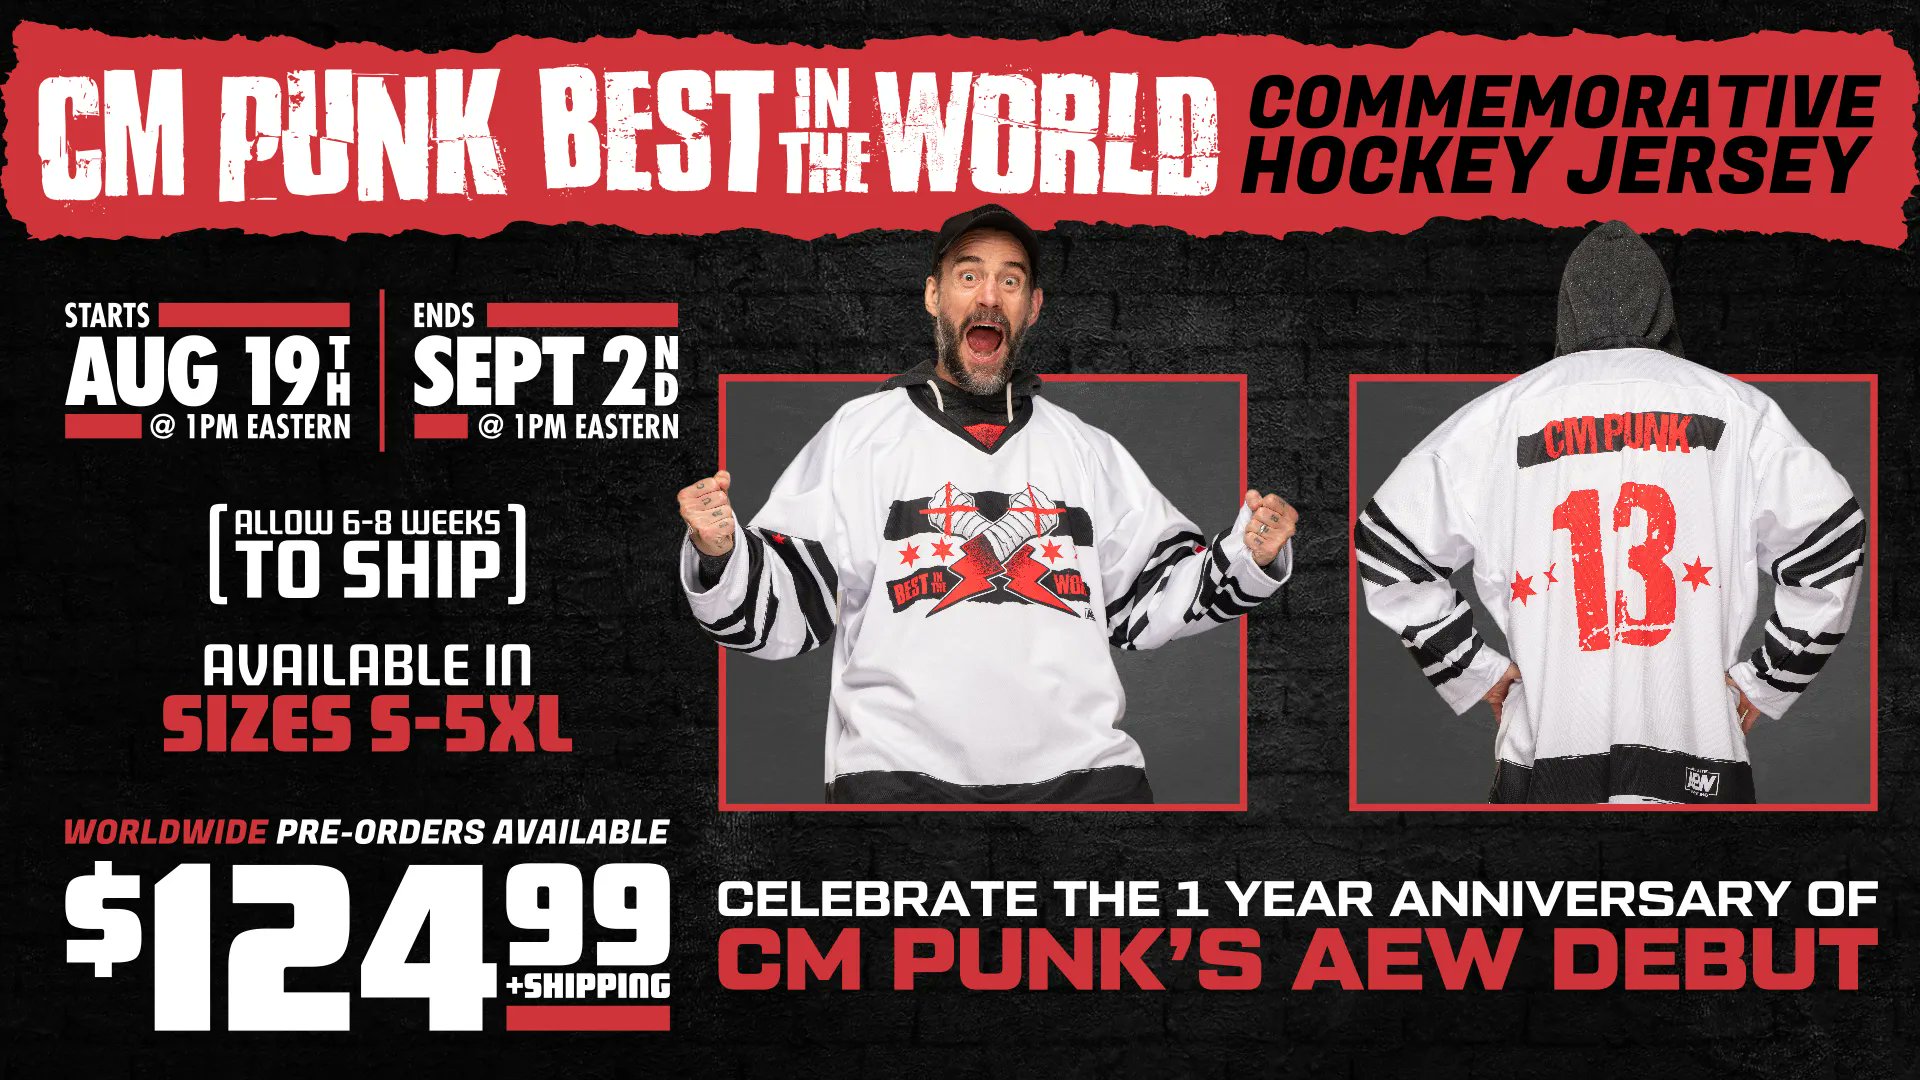 ShopAEW.com on Twitter: "Get ready!!! The worldwide pre-order window for @CMPunk's commemorative hockey begins TOMORROW at 1pm ET on https://t.co/9hHlXpcSbp! It's the perfect to celebrate the 1 year anniversary of #